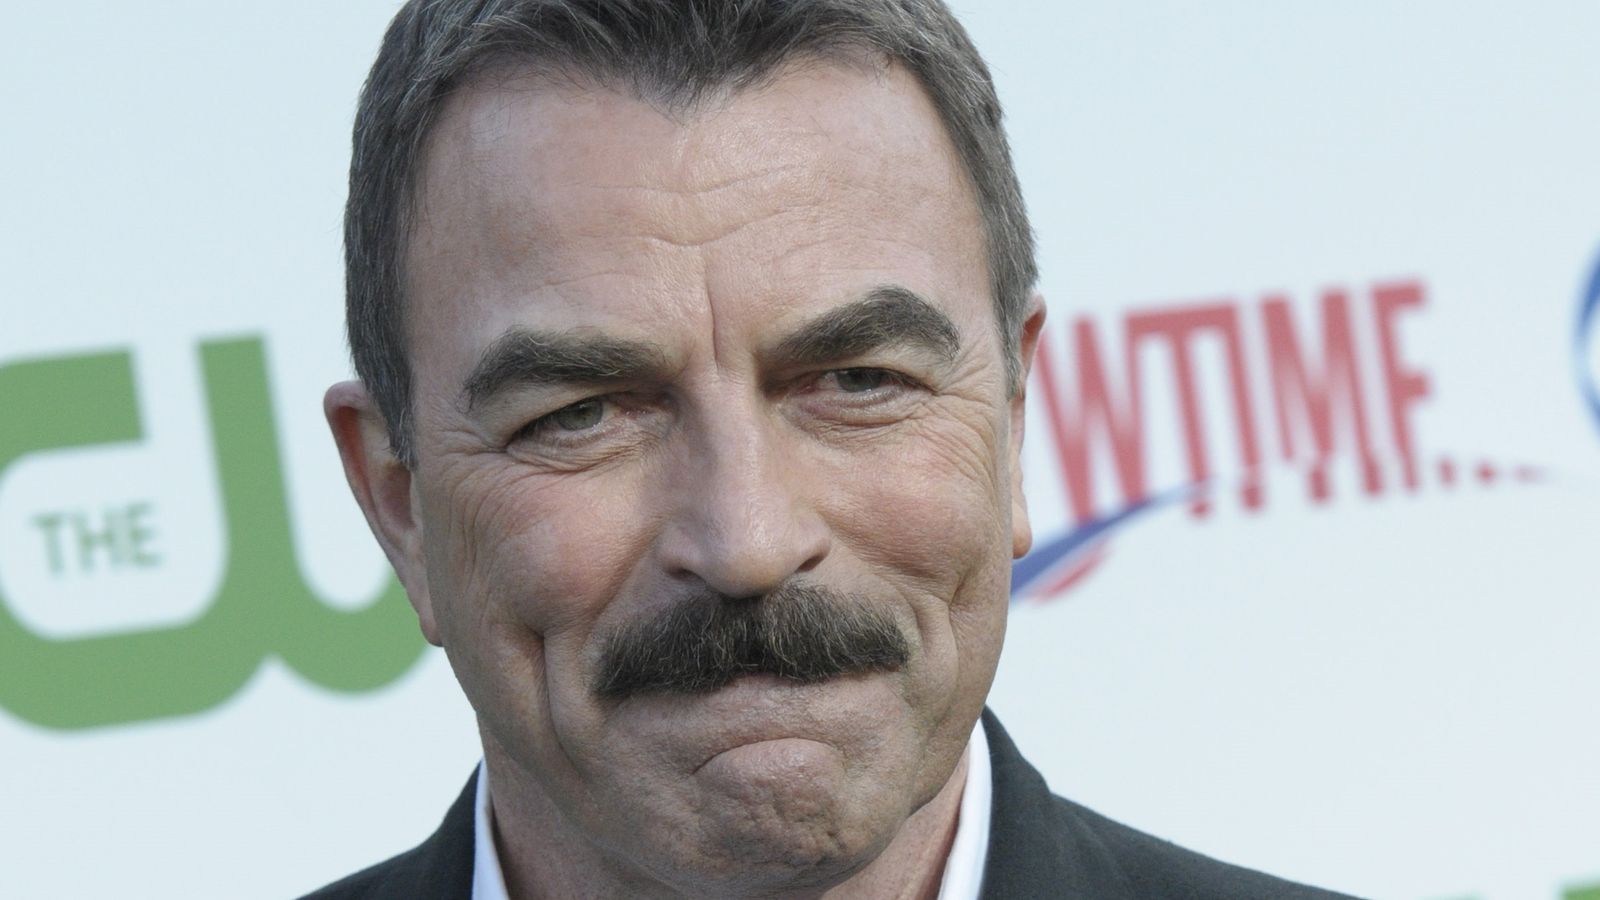 Tom Selleck was laughing with us when Matthew Perry walked in with the Richard moustache